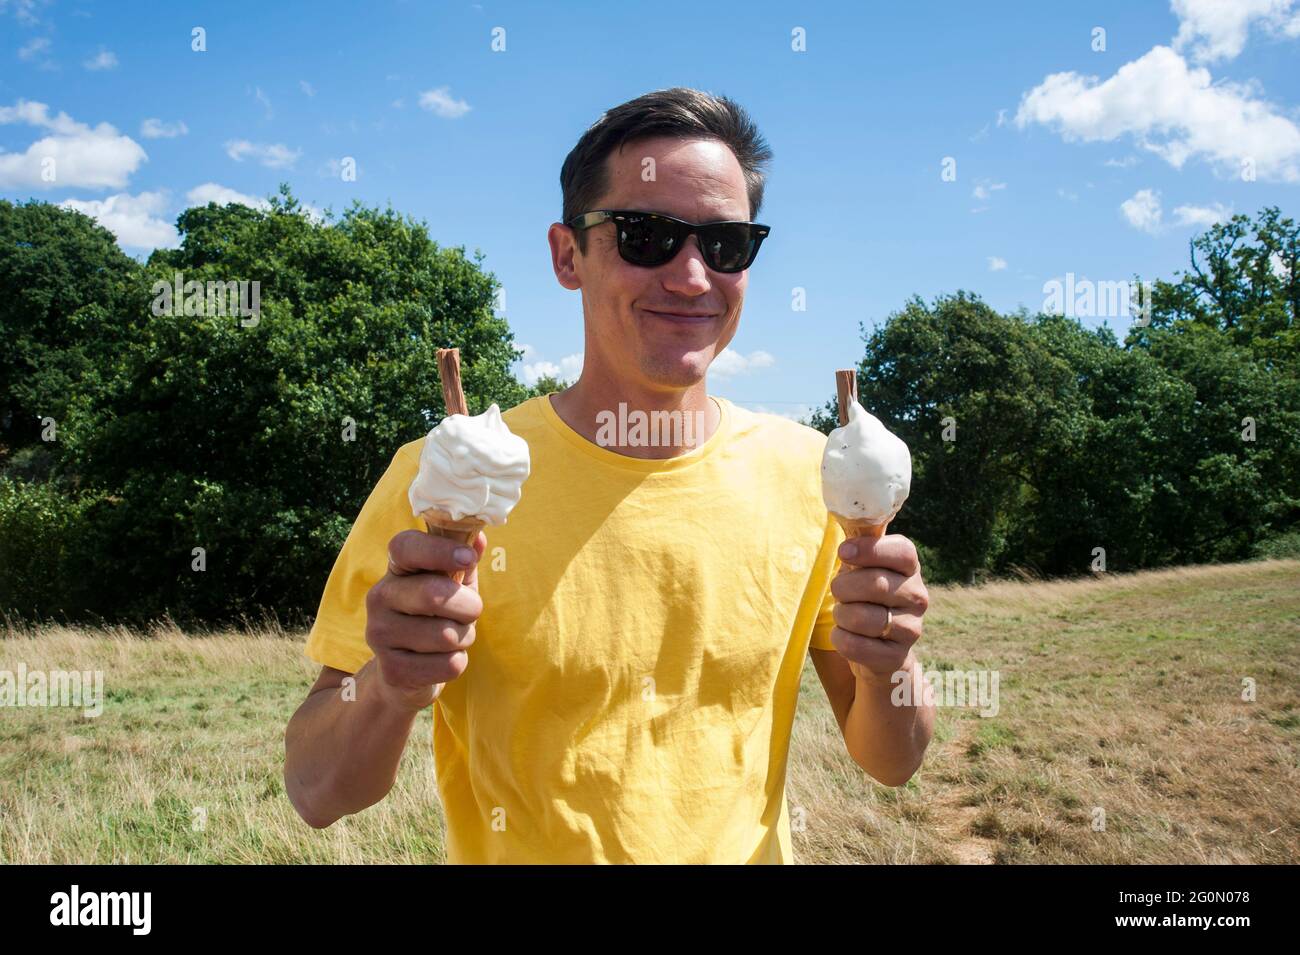 A man holding two ice creams in a field on a hot summers day. Stock Photo